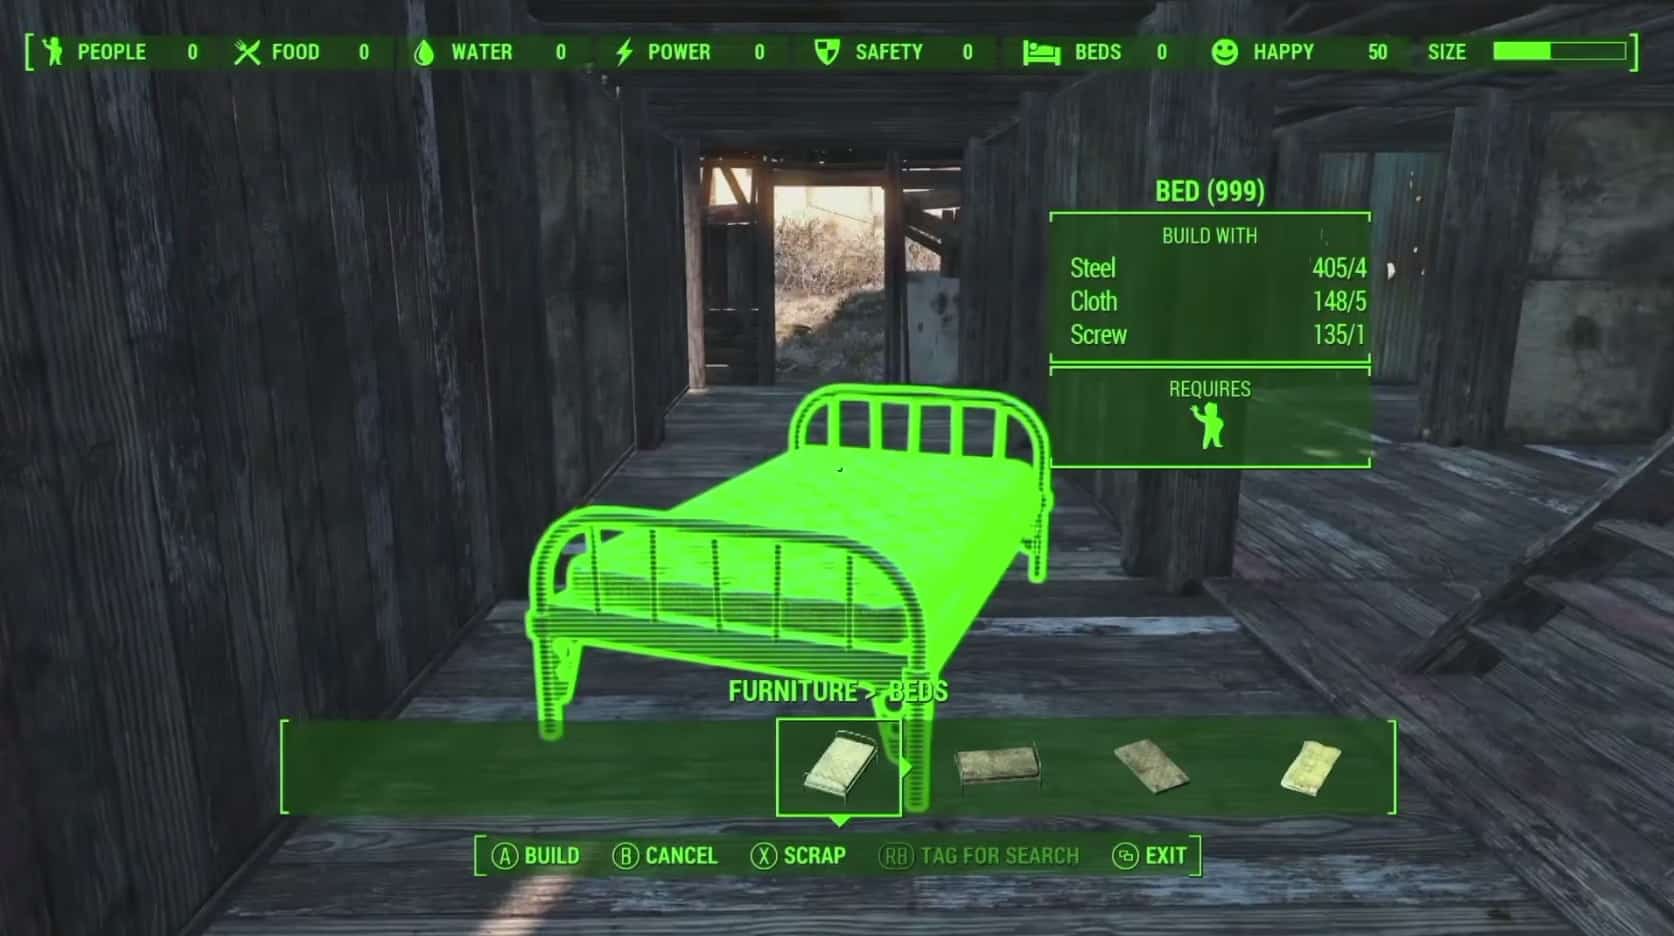 Fallout 4 Crafting Beds Xbox One PS4 PC Gameplay Screenshot